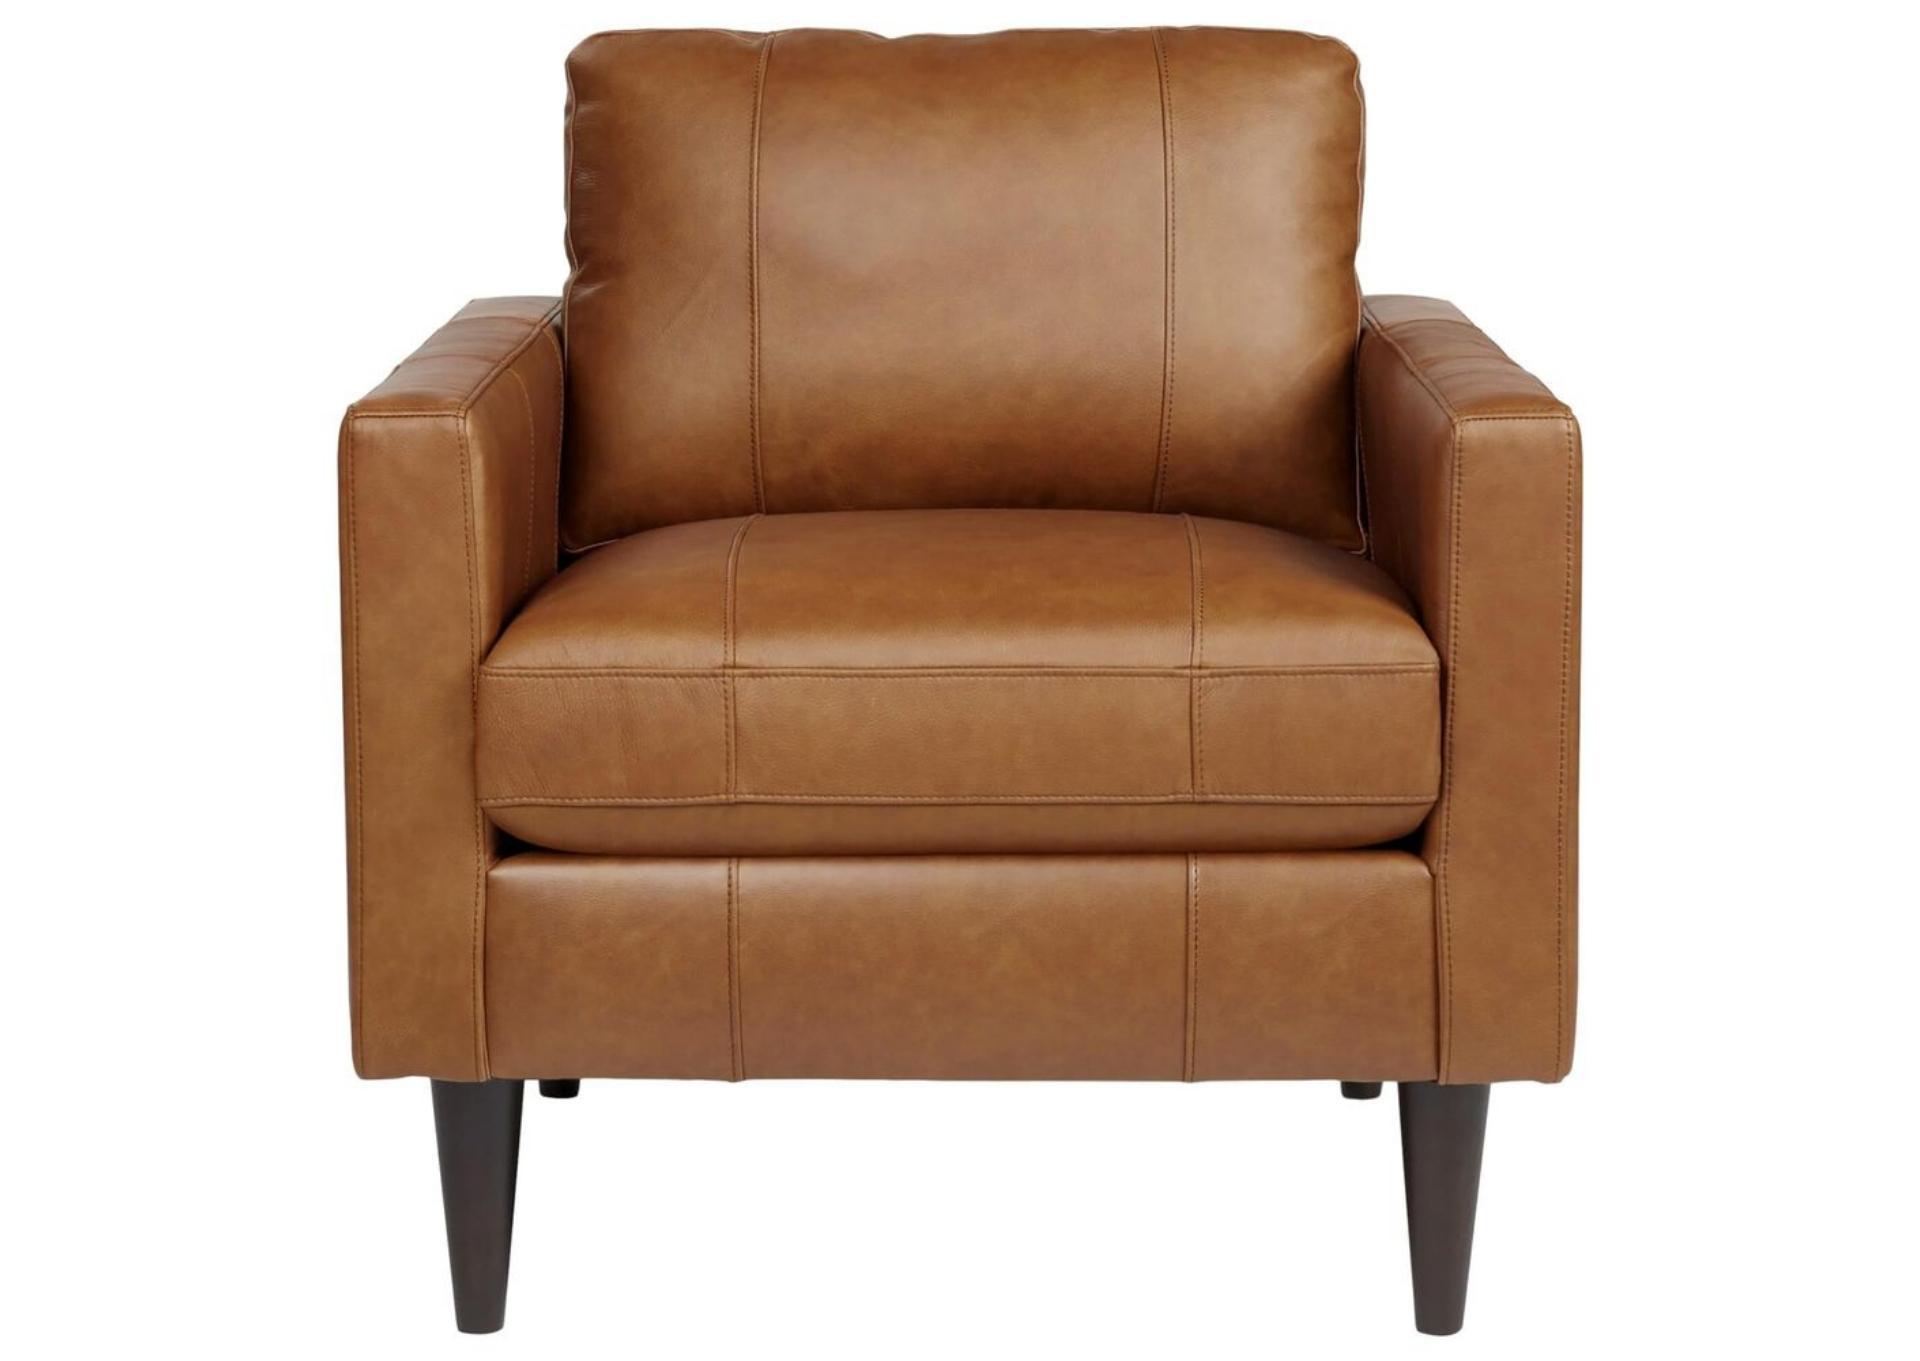 TRAFTON RUST LEATHER CHAIR